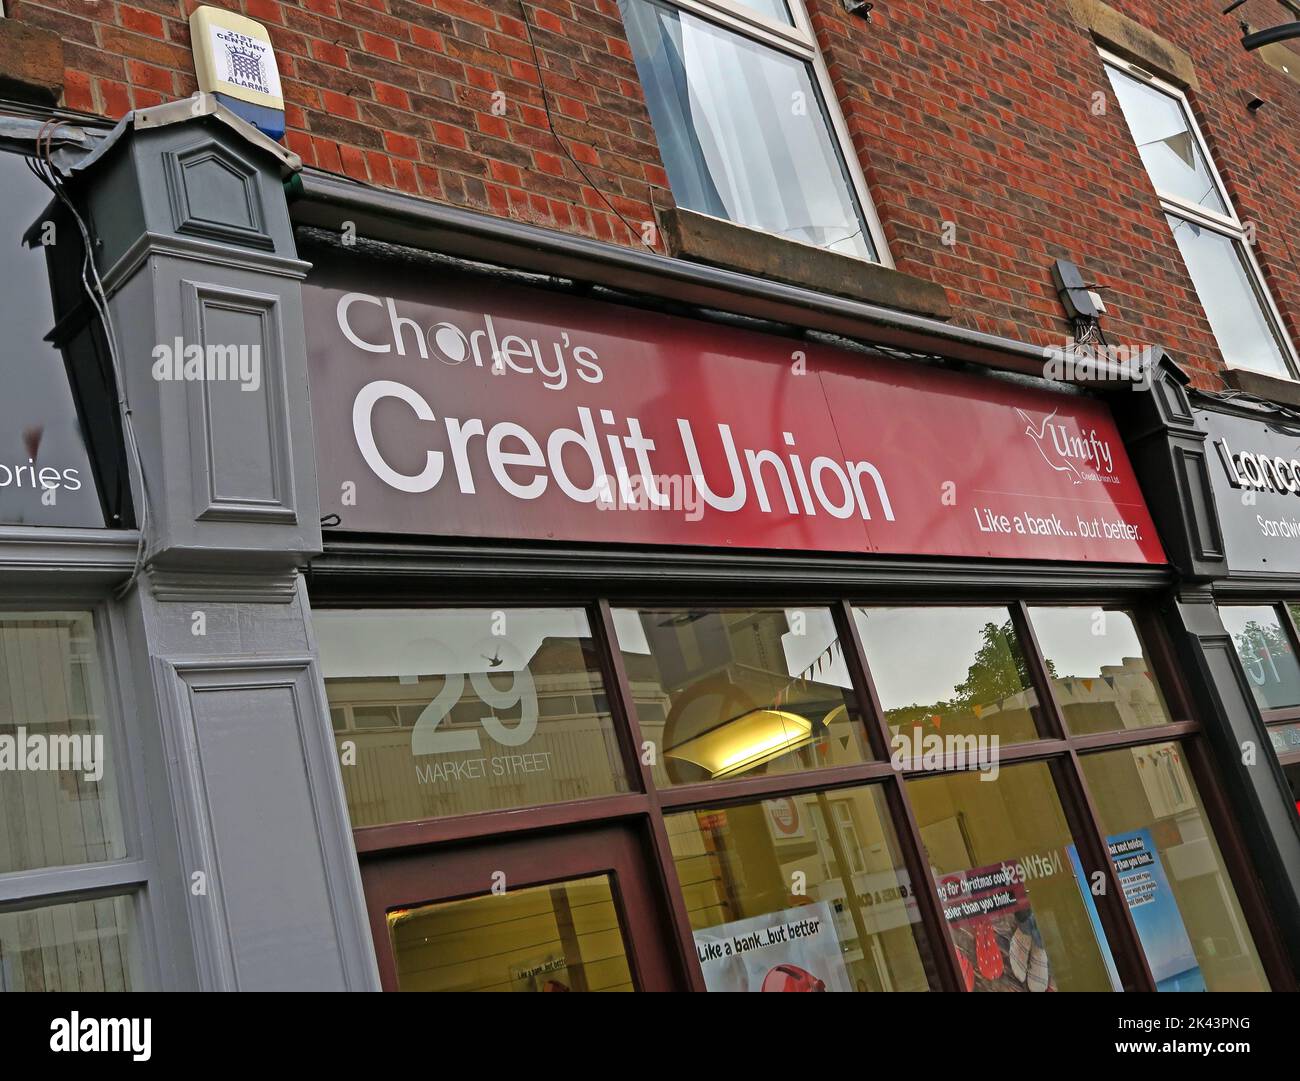 Credit union office in Chorley, Lancashire, England, helping poor people access savings and finance, 29 Market St, Chorley, PR7 2SY Stock Photo